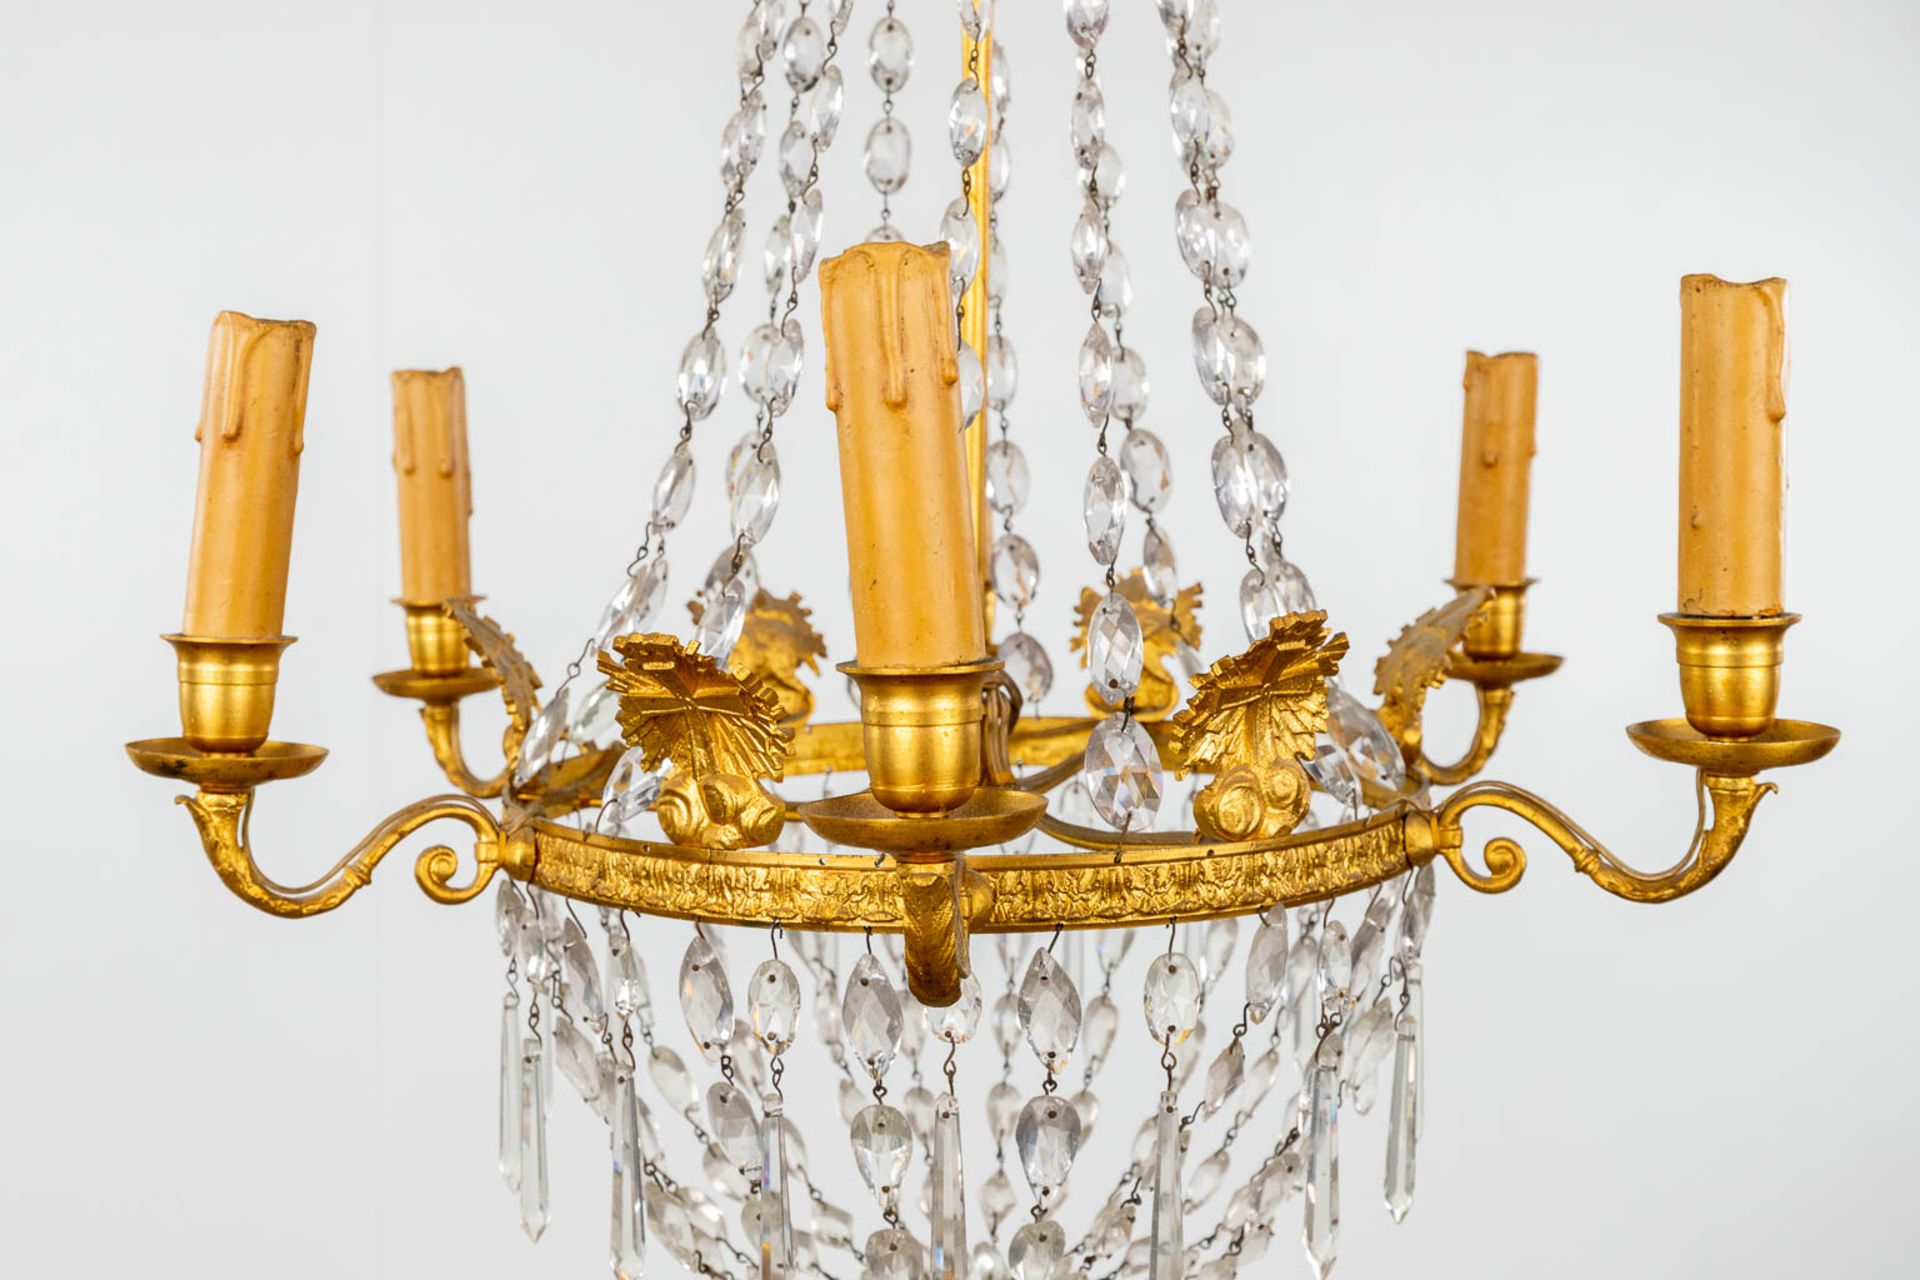 A chandelier 'Sac ˆ Perles', bronze and glass in empire style. 20th C. (H: 100 x D: 50 cm) - Bild 3 aus 11